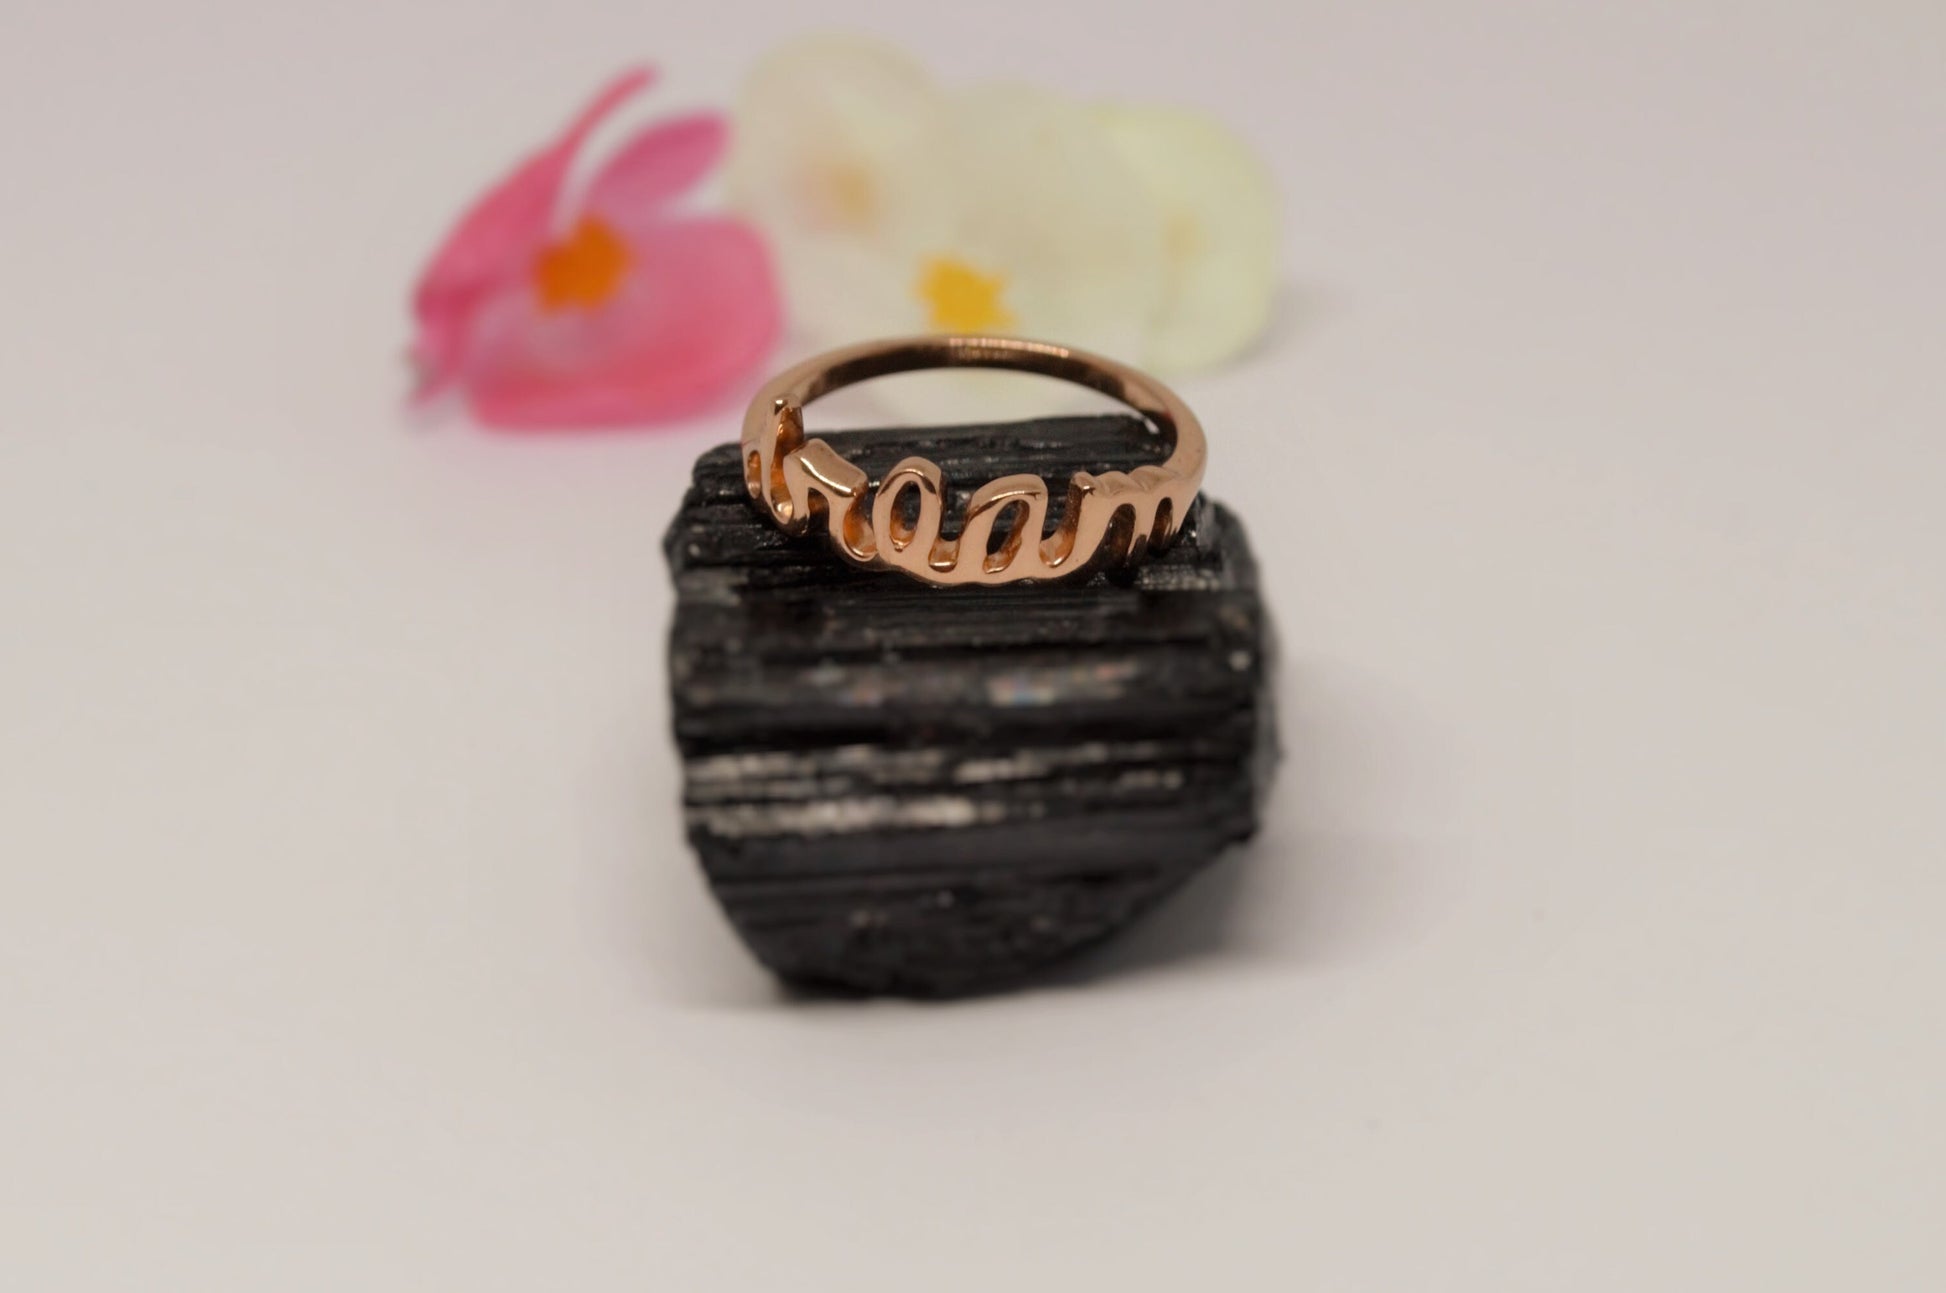 Rose Gold Ring, 925 Silver, Sterling Silver Ring, Dream Ring, UK Size L 1/2, Gift For Her, Birthday Gifts, Name Ring